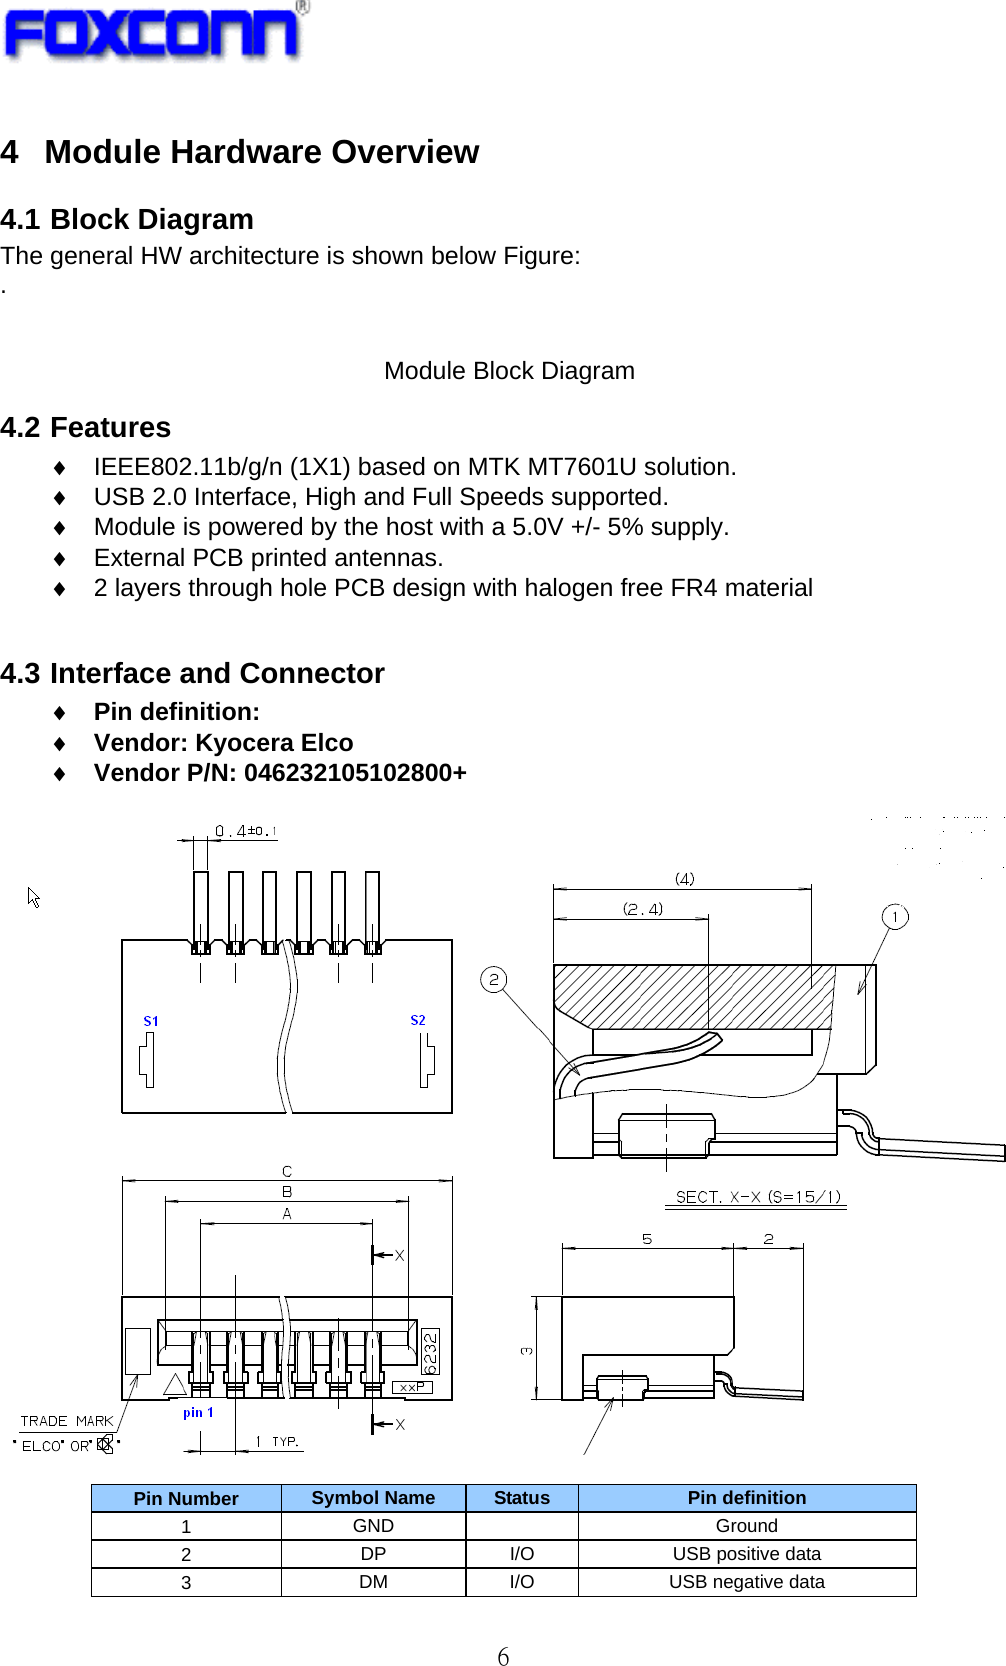   6 4  Module Hardware Overview 4.1 Block Diagram The general HW architecture is shown below Figure: .    Module Block Diagram 4.2 Features ♦  IEEE802.11b/g/n (1X1) based on MTK MT7601U solution. ♦  USB 2.0 Interface, High and Full Speeds supported. ♦  Module is powered by the host with a 5.0V +/- 5% supply. ♦  External PCB printed antennas. ♦  2 layers through hole PCB design with halogen free FR4 material  4.3 Interface and Connector ♦ Pin definition:   ♦ Vendor: Kyocera Elco ♦ Vendor P/N: 046232105102800+    Pin Number  Symbol Name  Status  Pin definition 1  GND   Ground 2  DP  I/O  USB positive data 3  DM I/O  USB negative data 